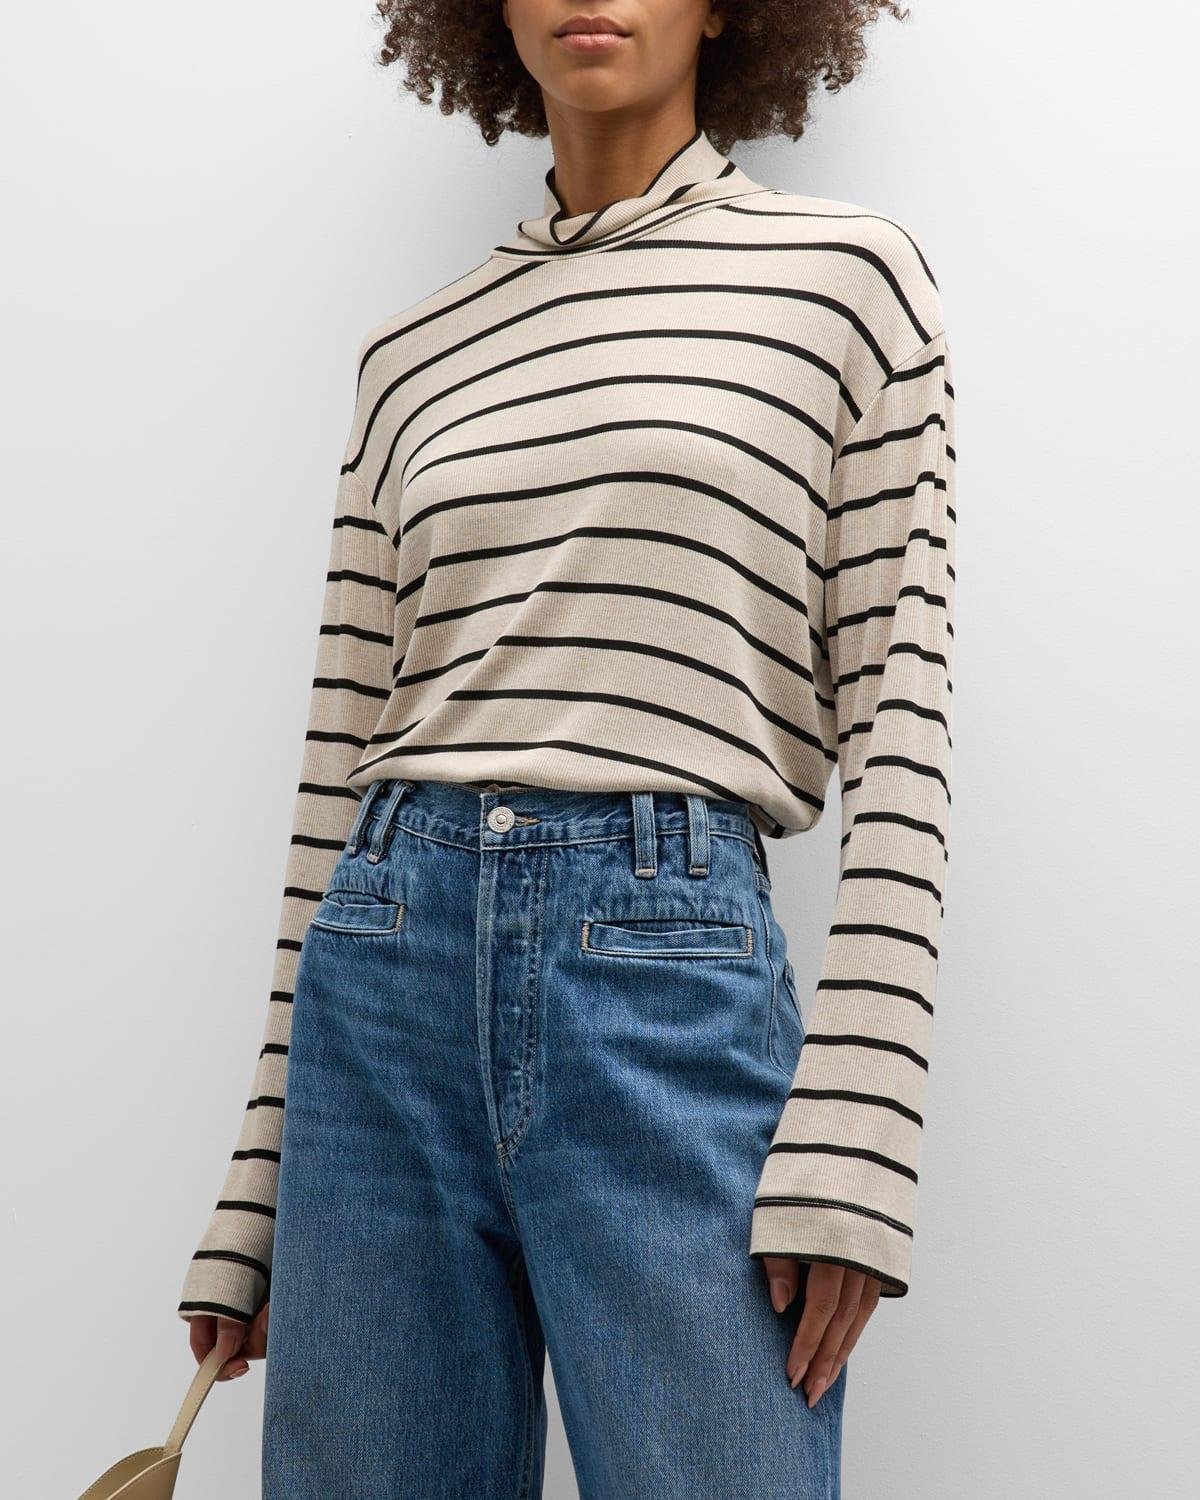 Selma Stripe Long Sleeve Turtleneck by CITIZENS OF HUMANITY